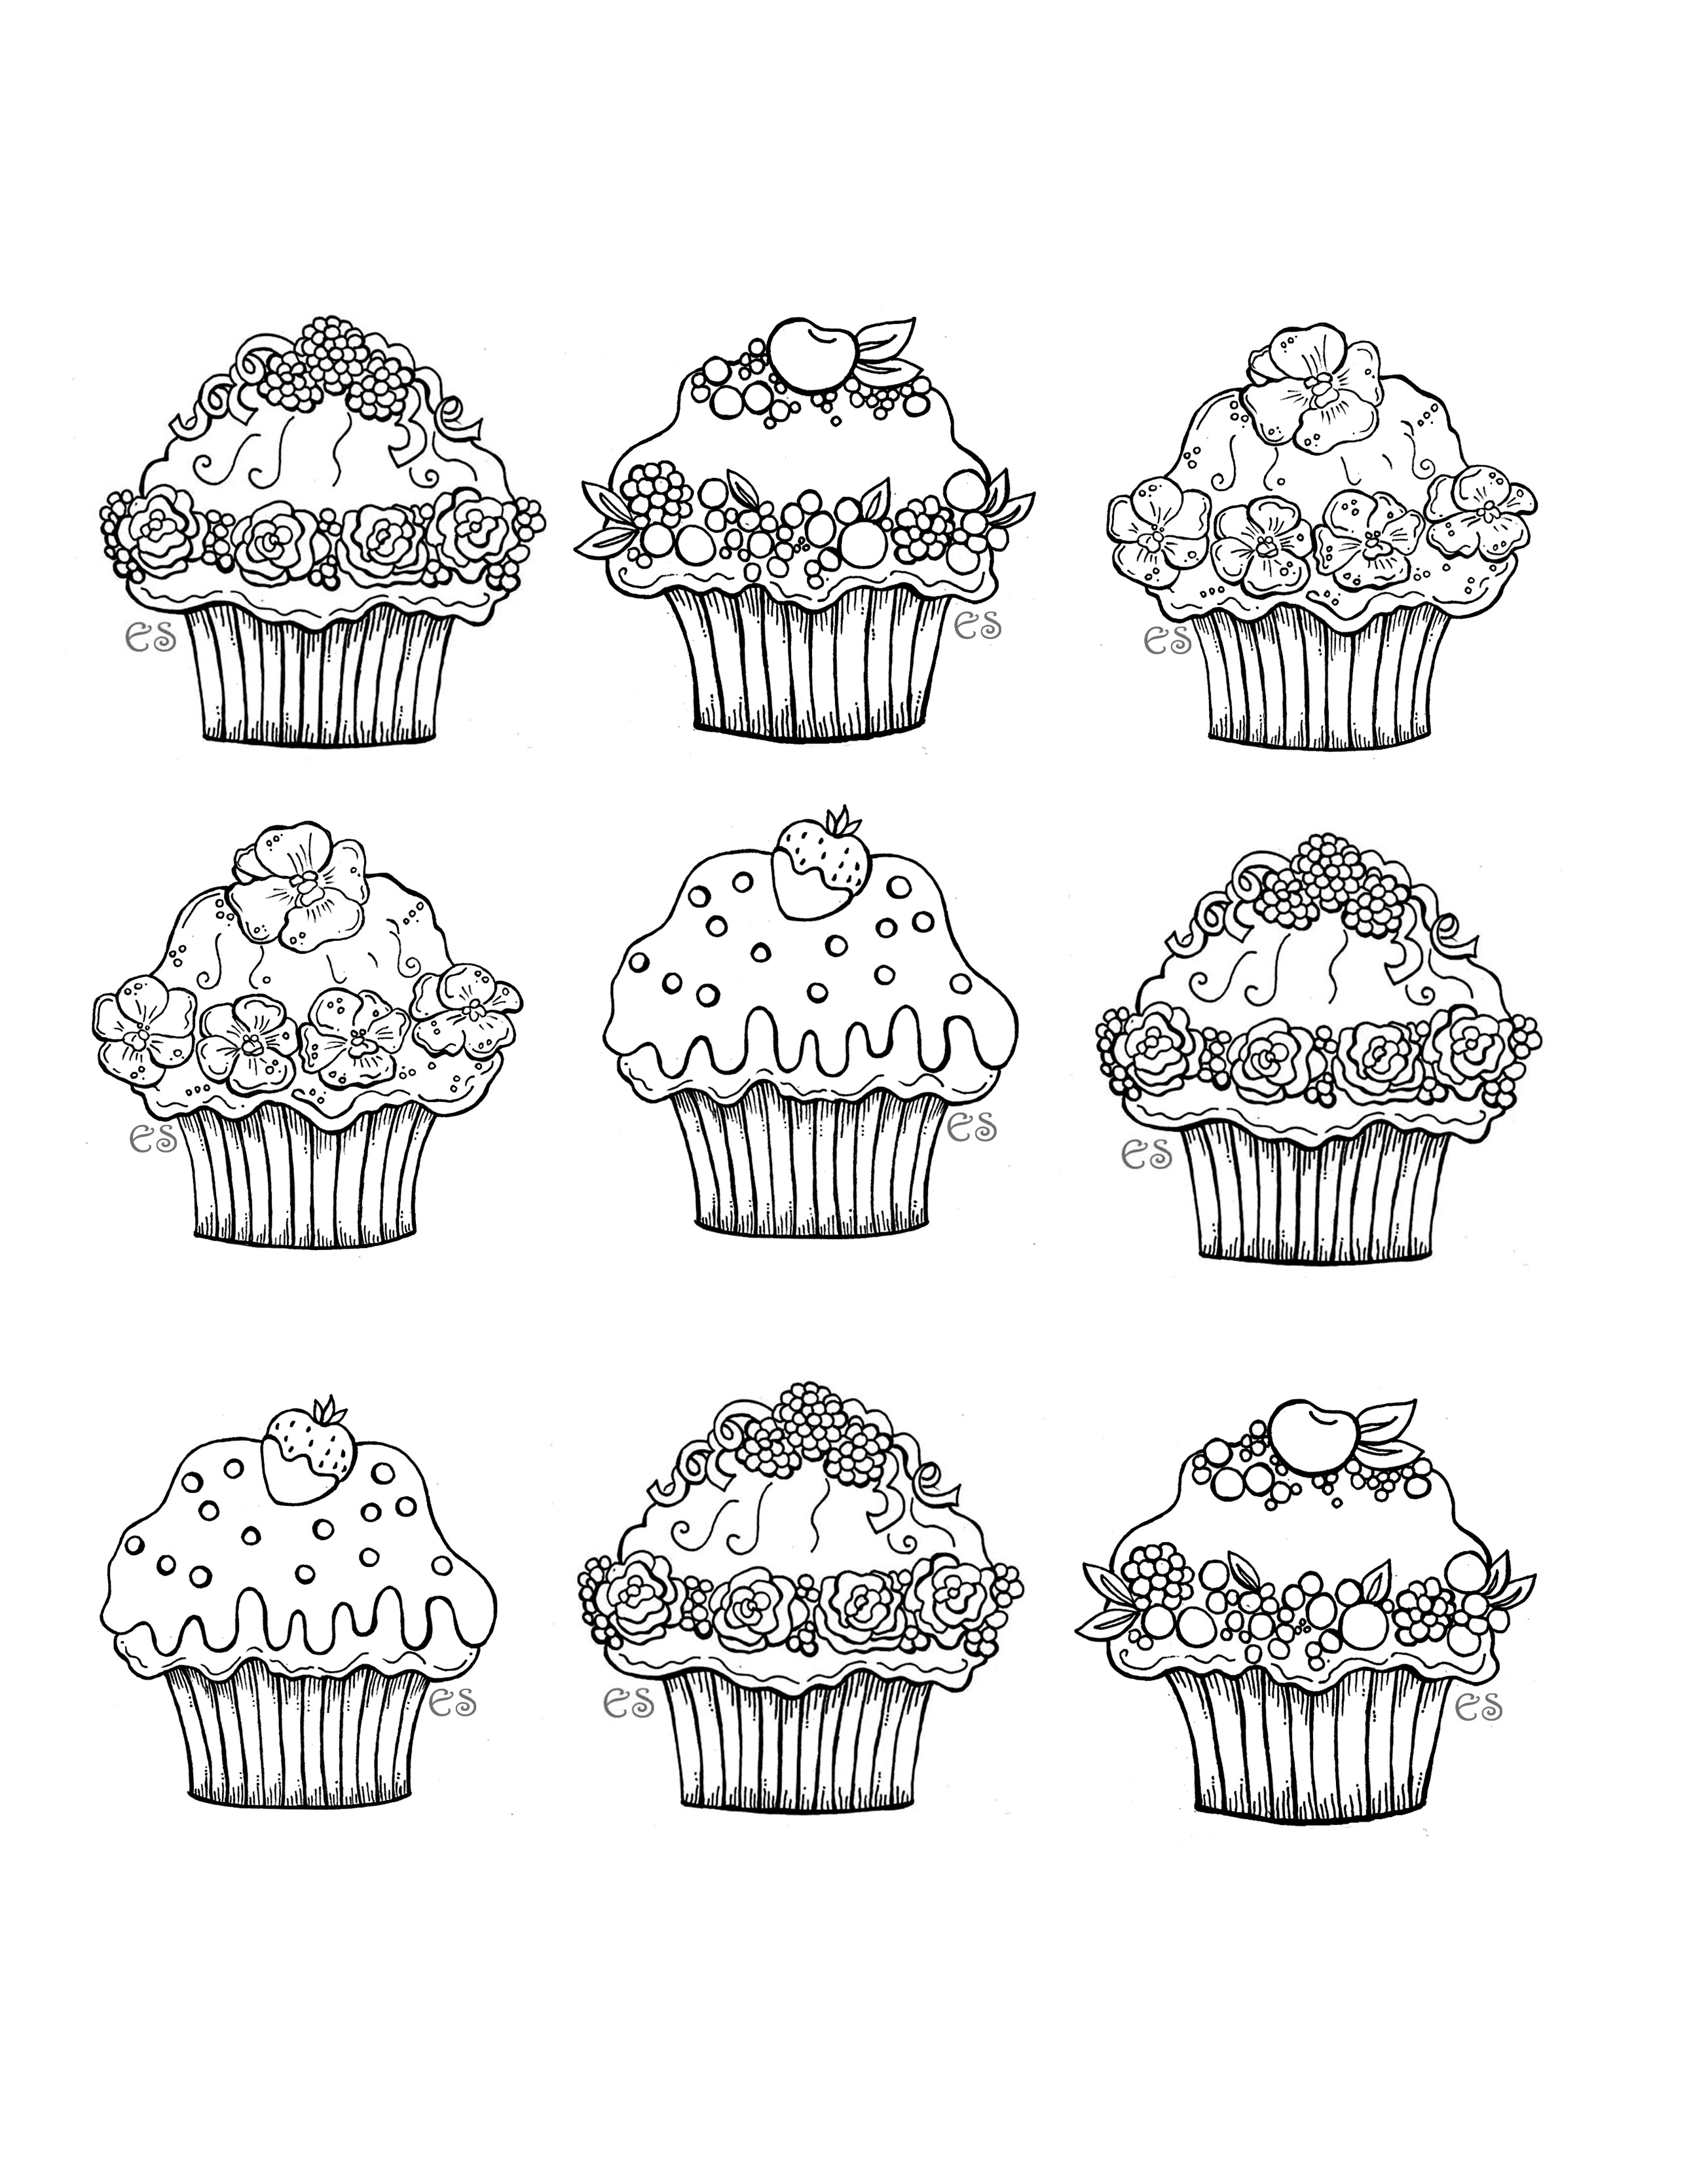 Six cute cupcakes - Cupcakes Adult Coloring Pages